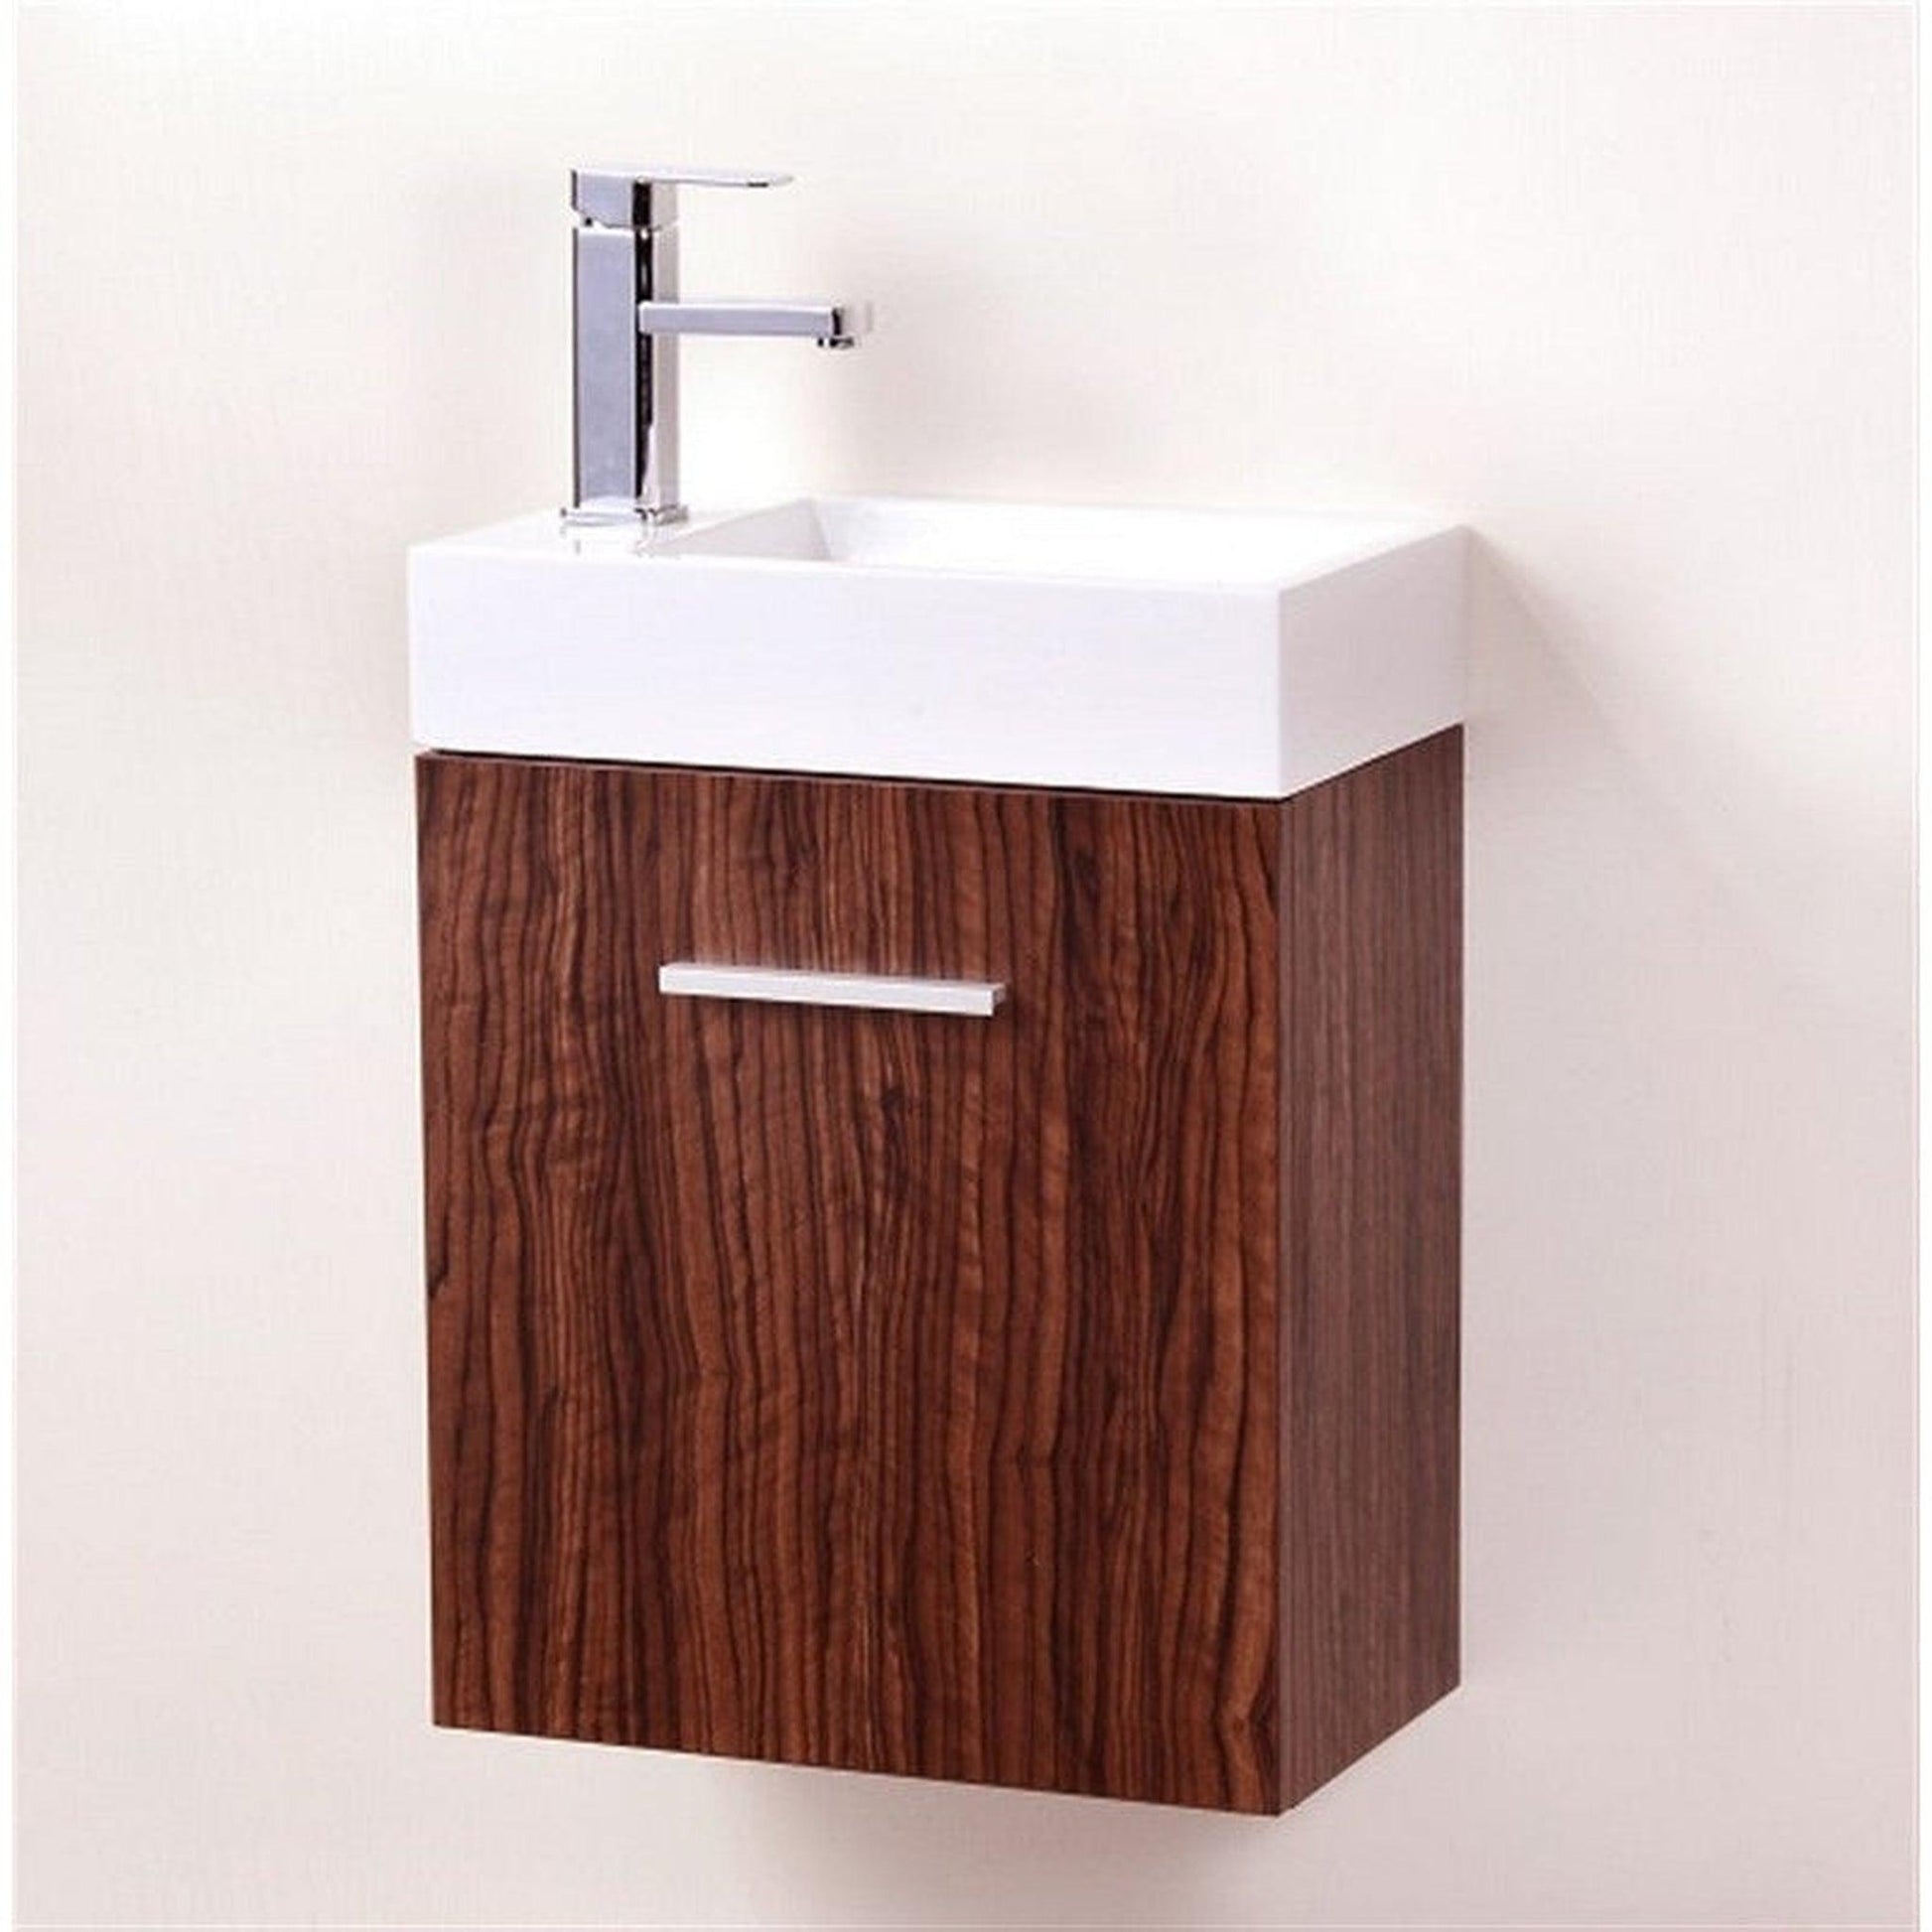 KubeBath Bliss 18" Walnut Wall-Mounted Modern Bathroom Vanity With Single Integrated Acrylic Sink With Overflow and 22" Wood Framed Mirror With Shelf